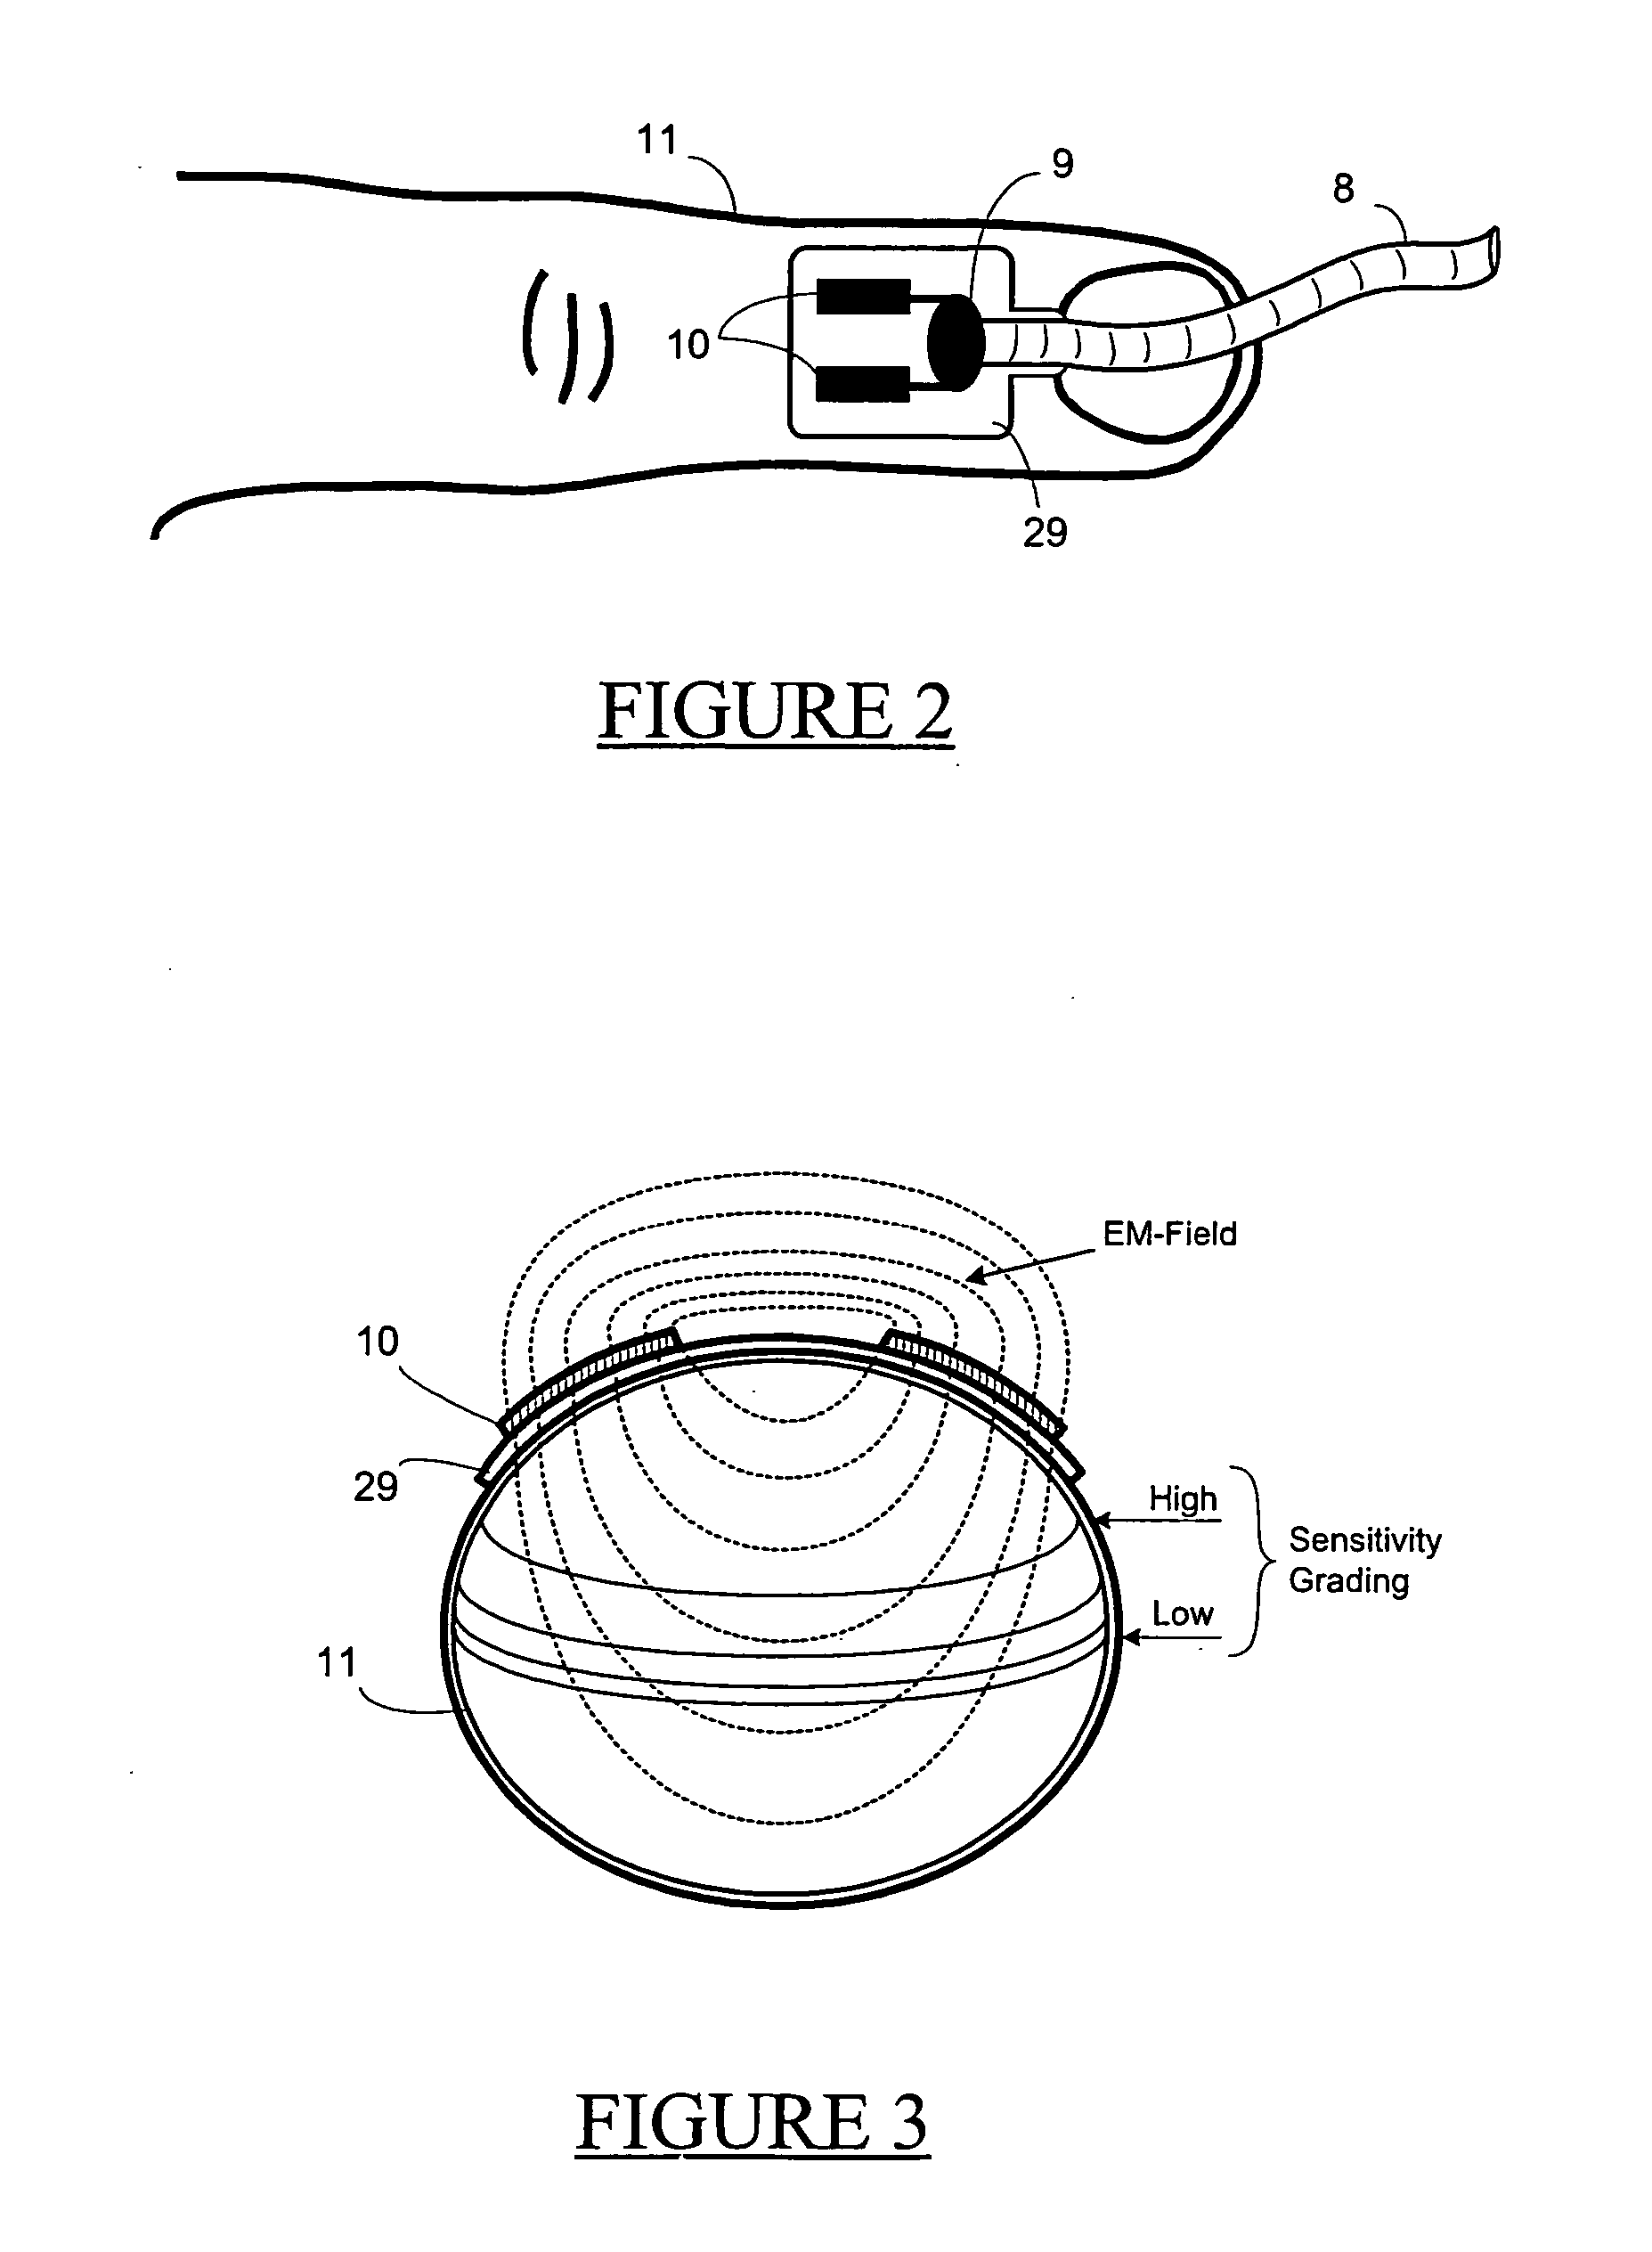 Method and apparatus for non-contact monitoring of cellular bioactivity